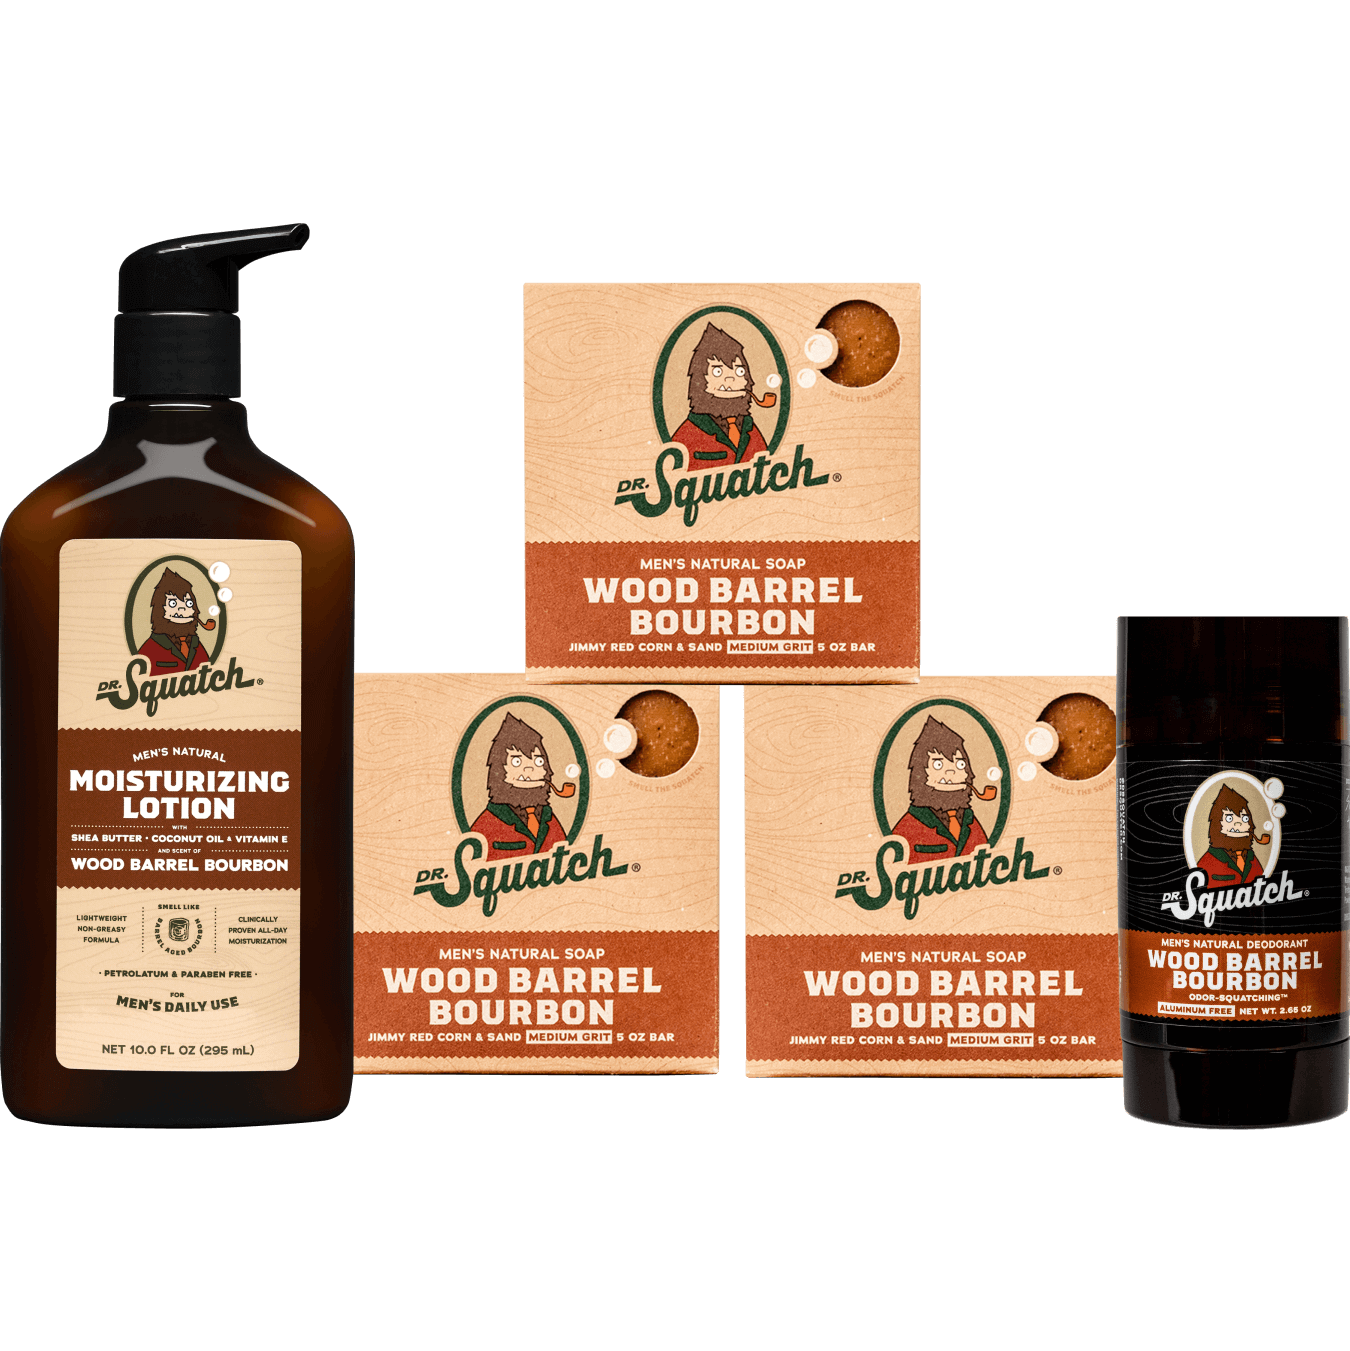  Dr. Squatch Men's Natural Lotion Non-Greasy Men's Lotion -  24-hour moisturization hand and body lotion - Made with Shea Butter,  Coconut Oil, and Vitamin E - Pine Tar (2 Pack) 